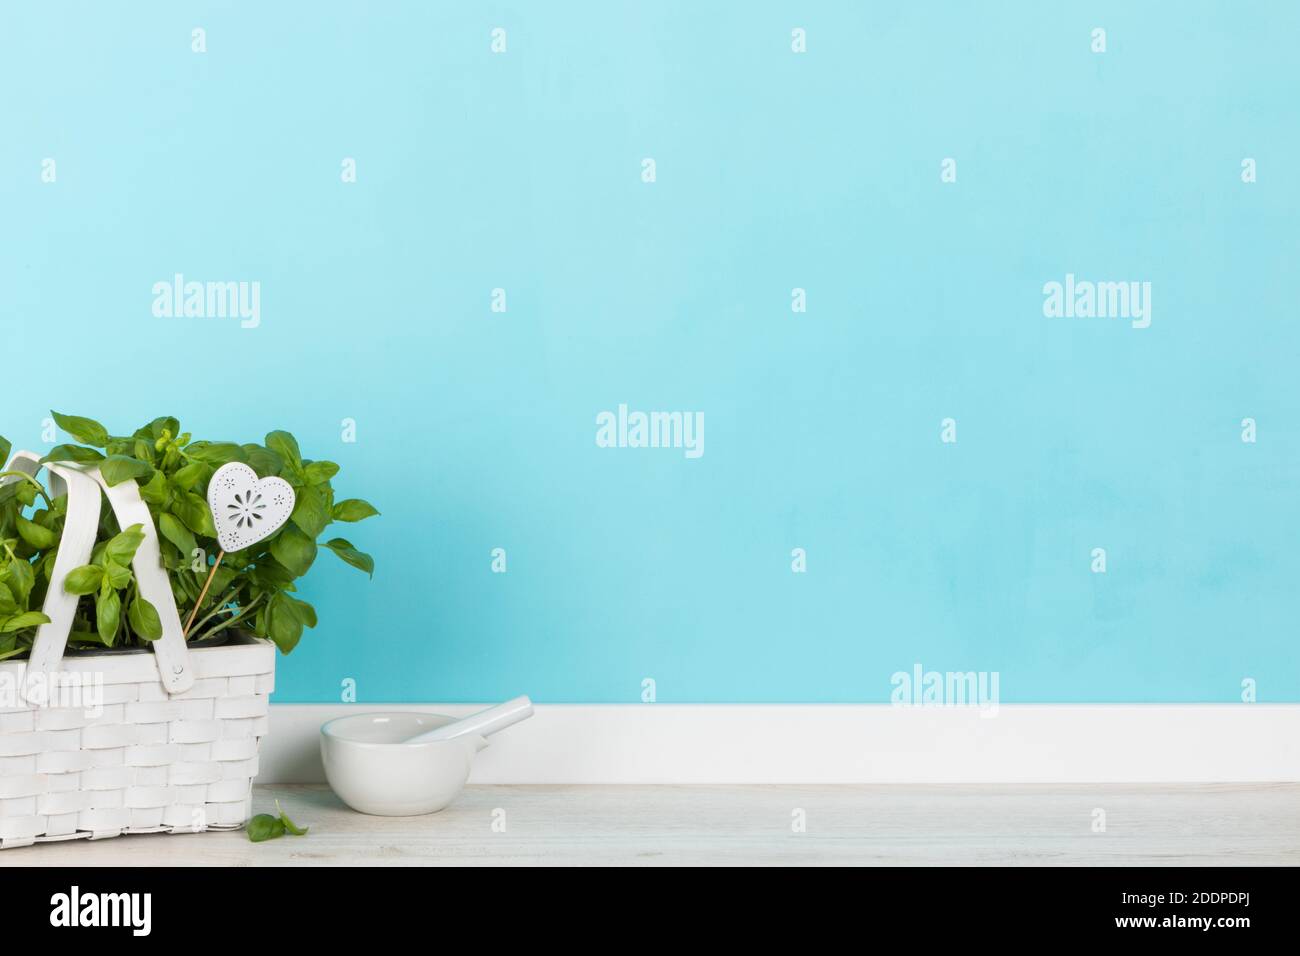 Kitchen background with basil plan in white basket with heart tagt and mortar. Copy space on turquoise wall Stock Photo